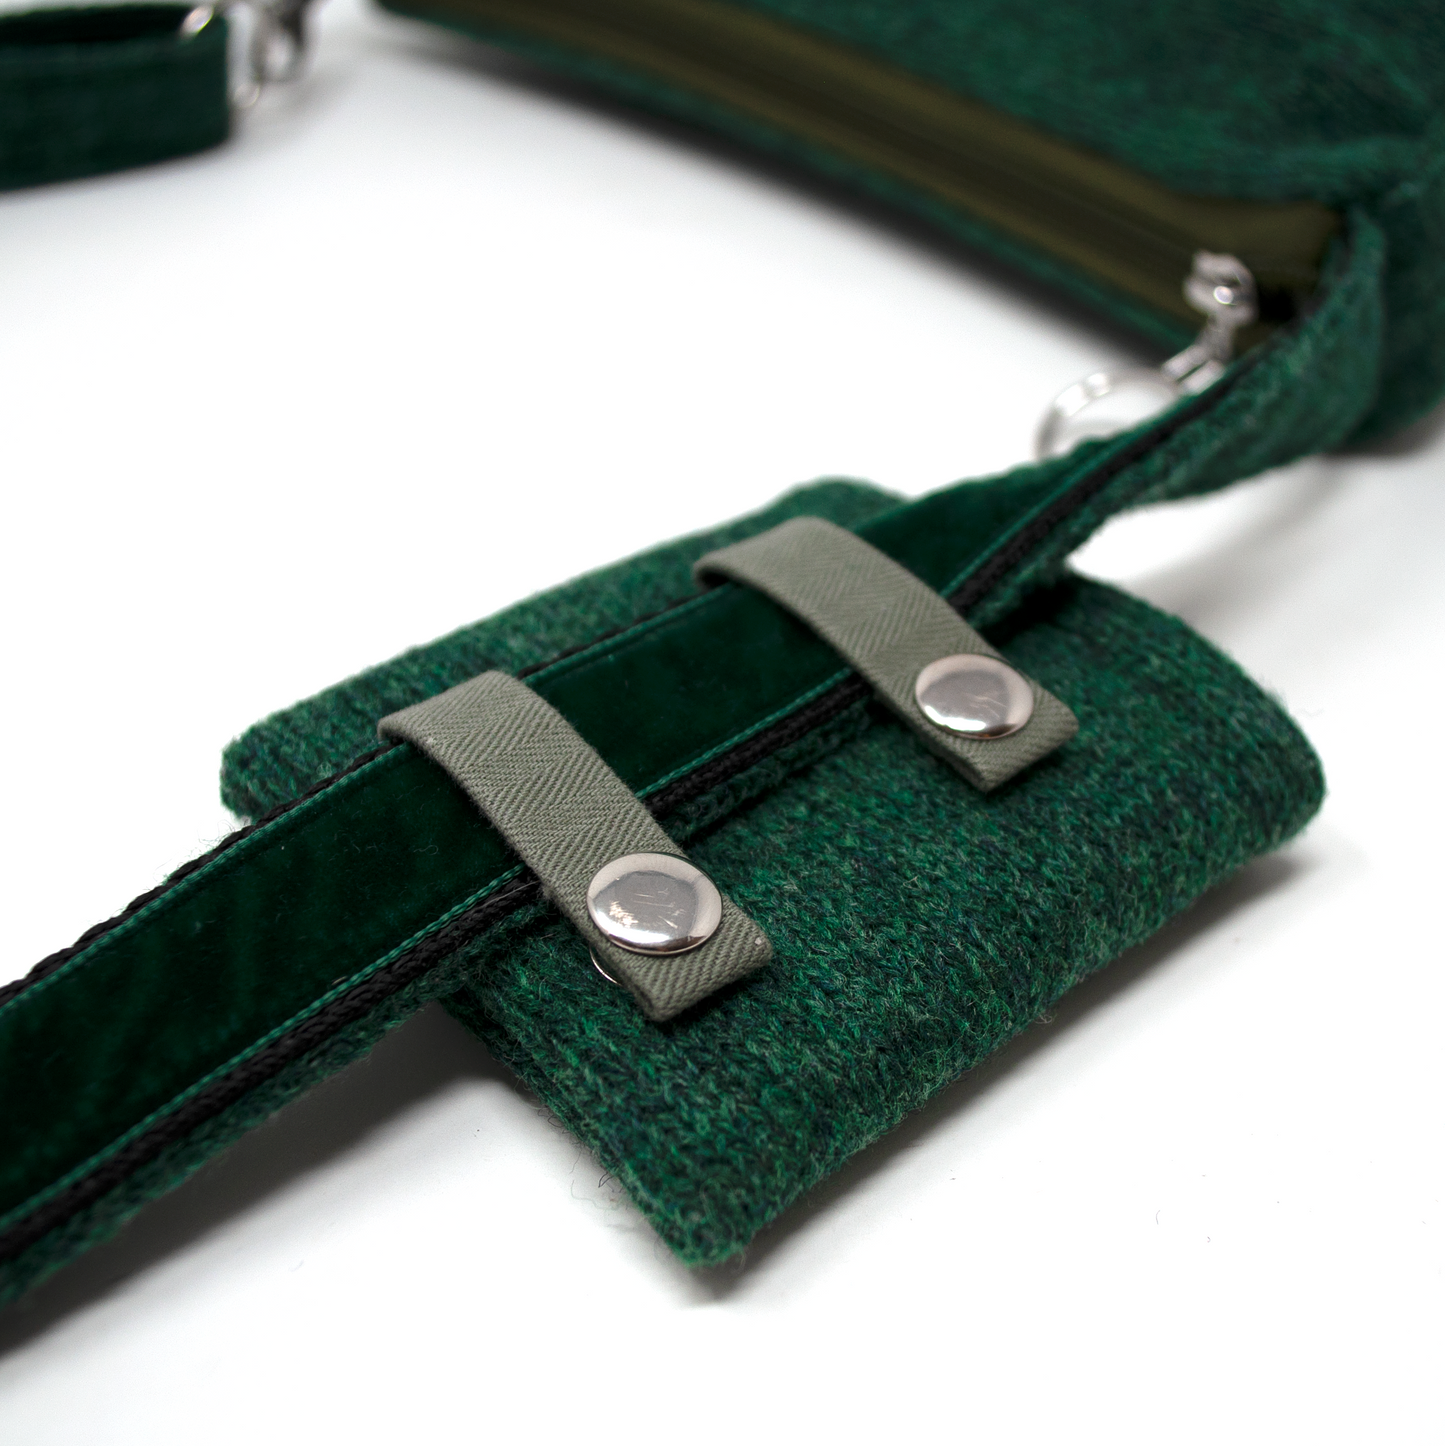 Clover Leaf - Autumn/Winter '23 Collection - Cross Body Bag